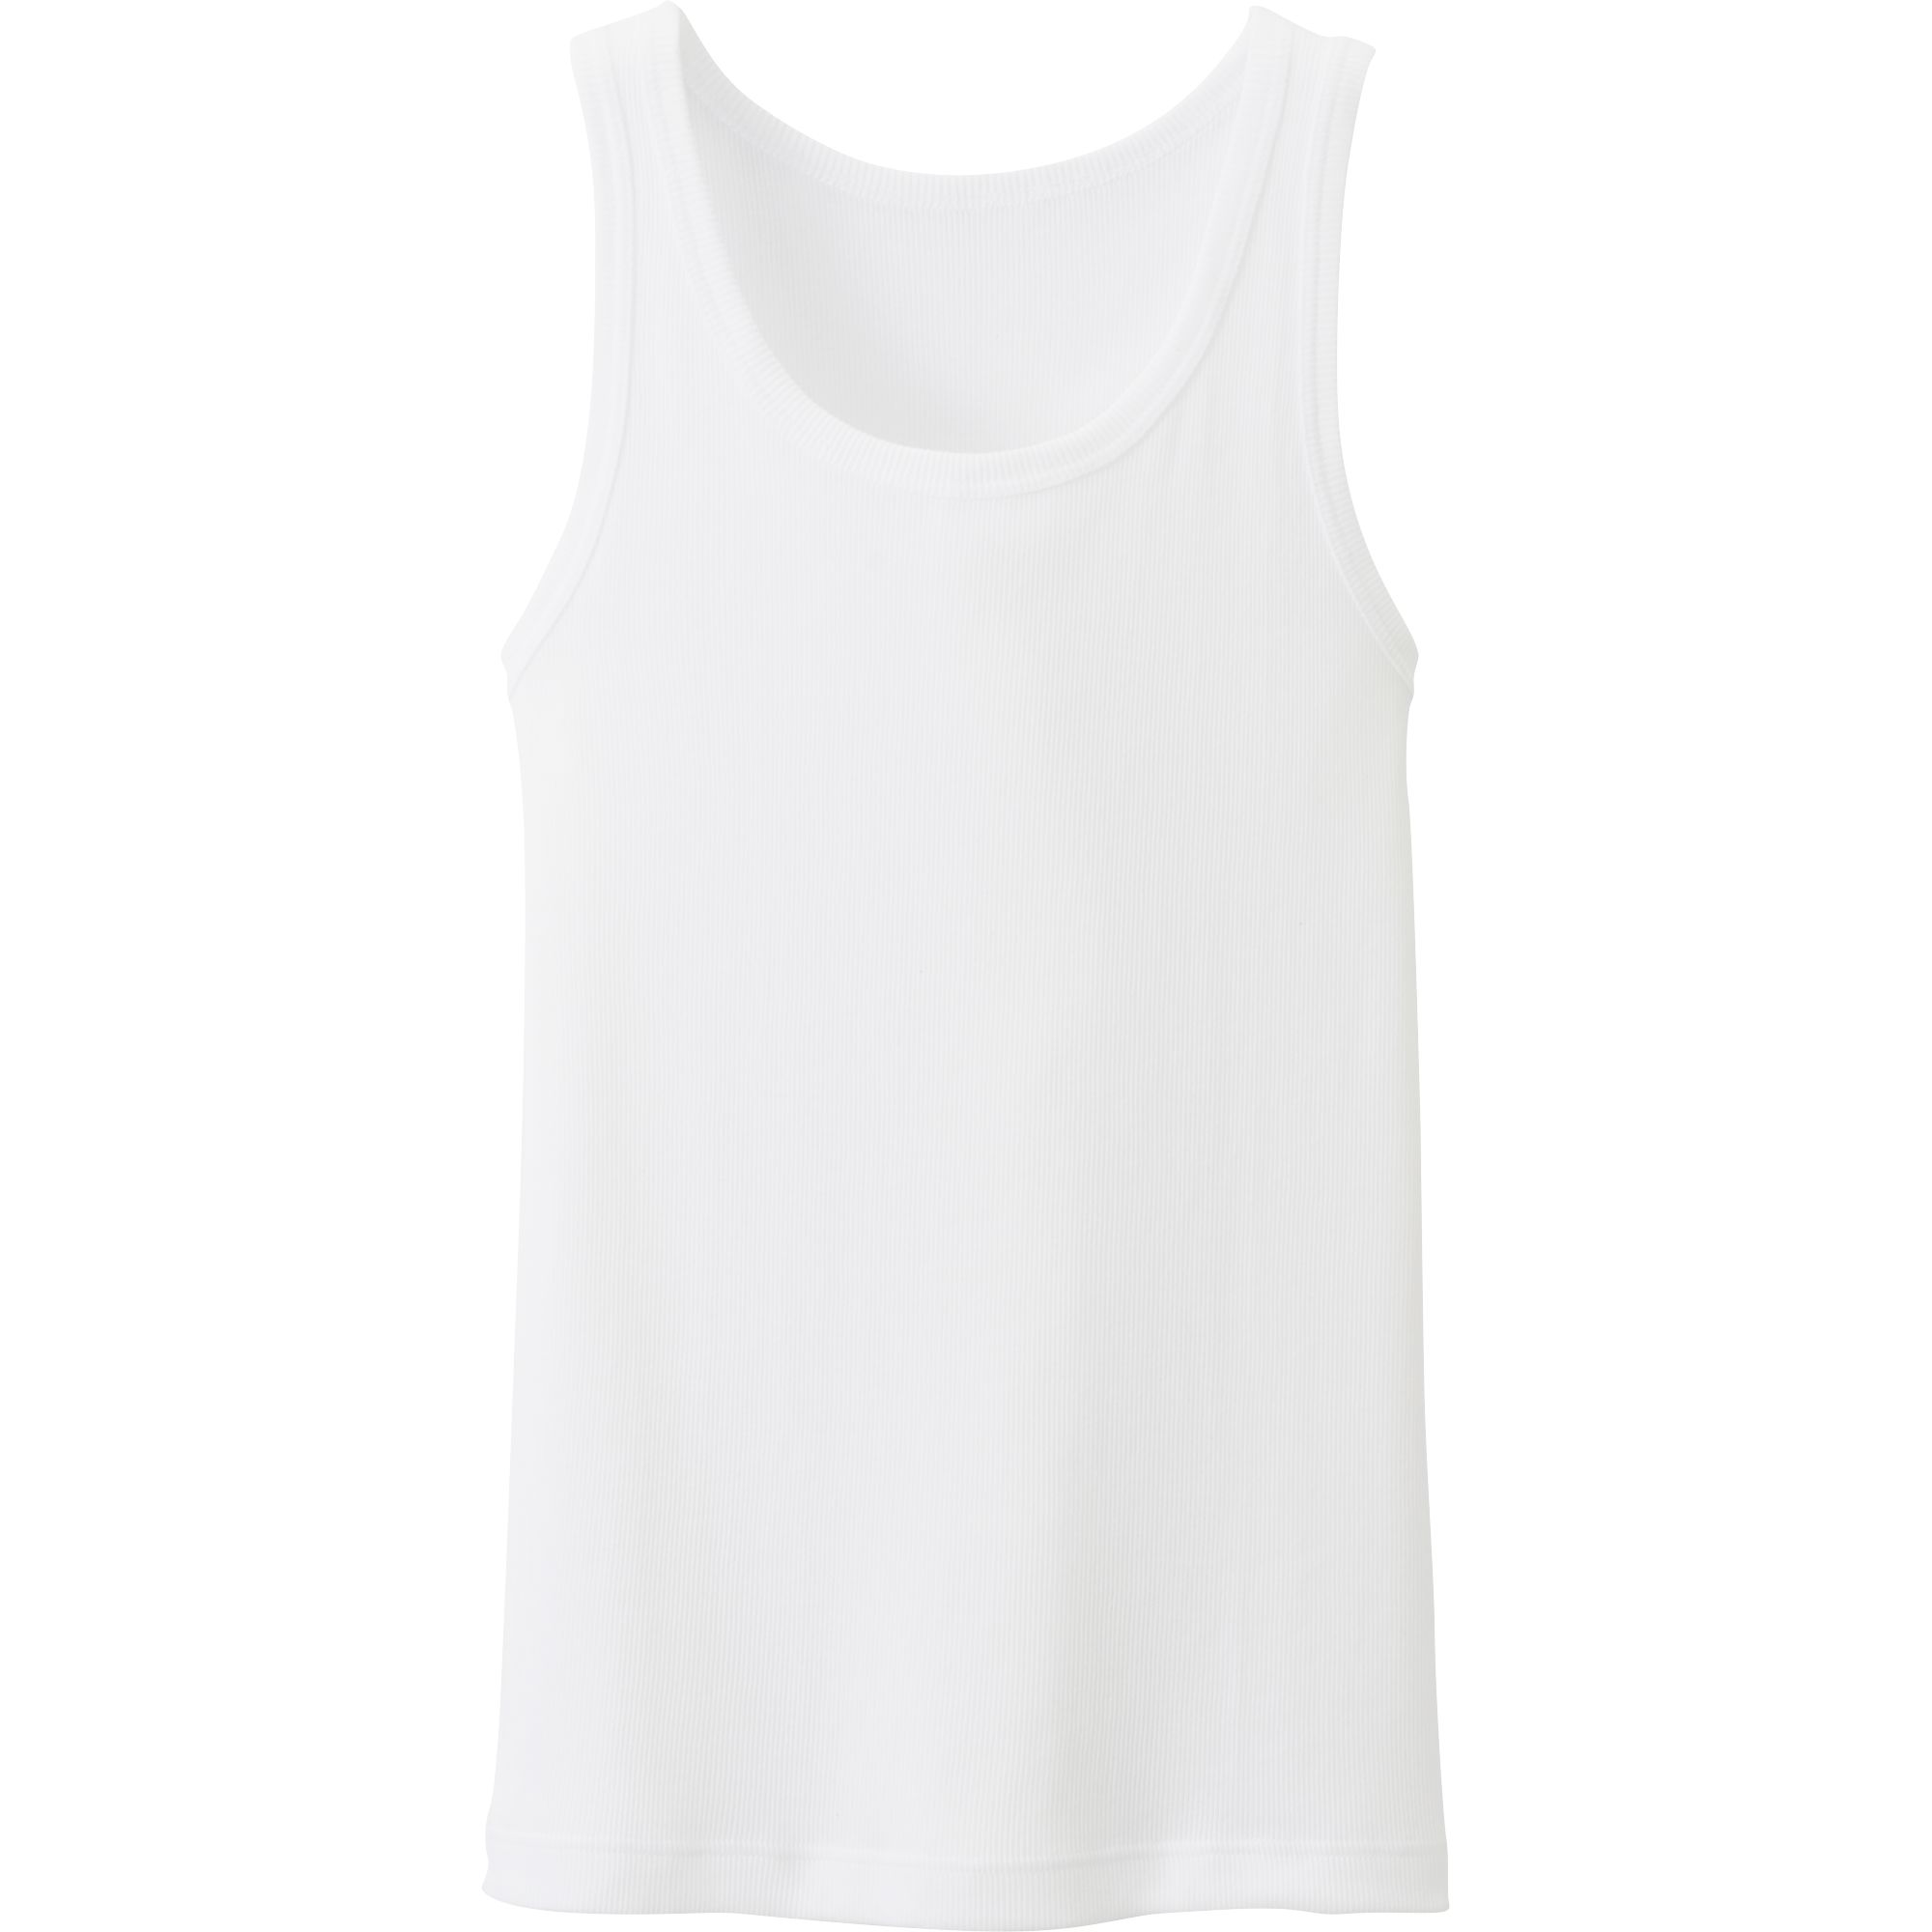 MEN PACKAGED DRY COLOR RIB TANK TOP | UNIQLO